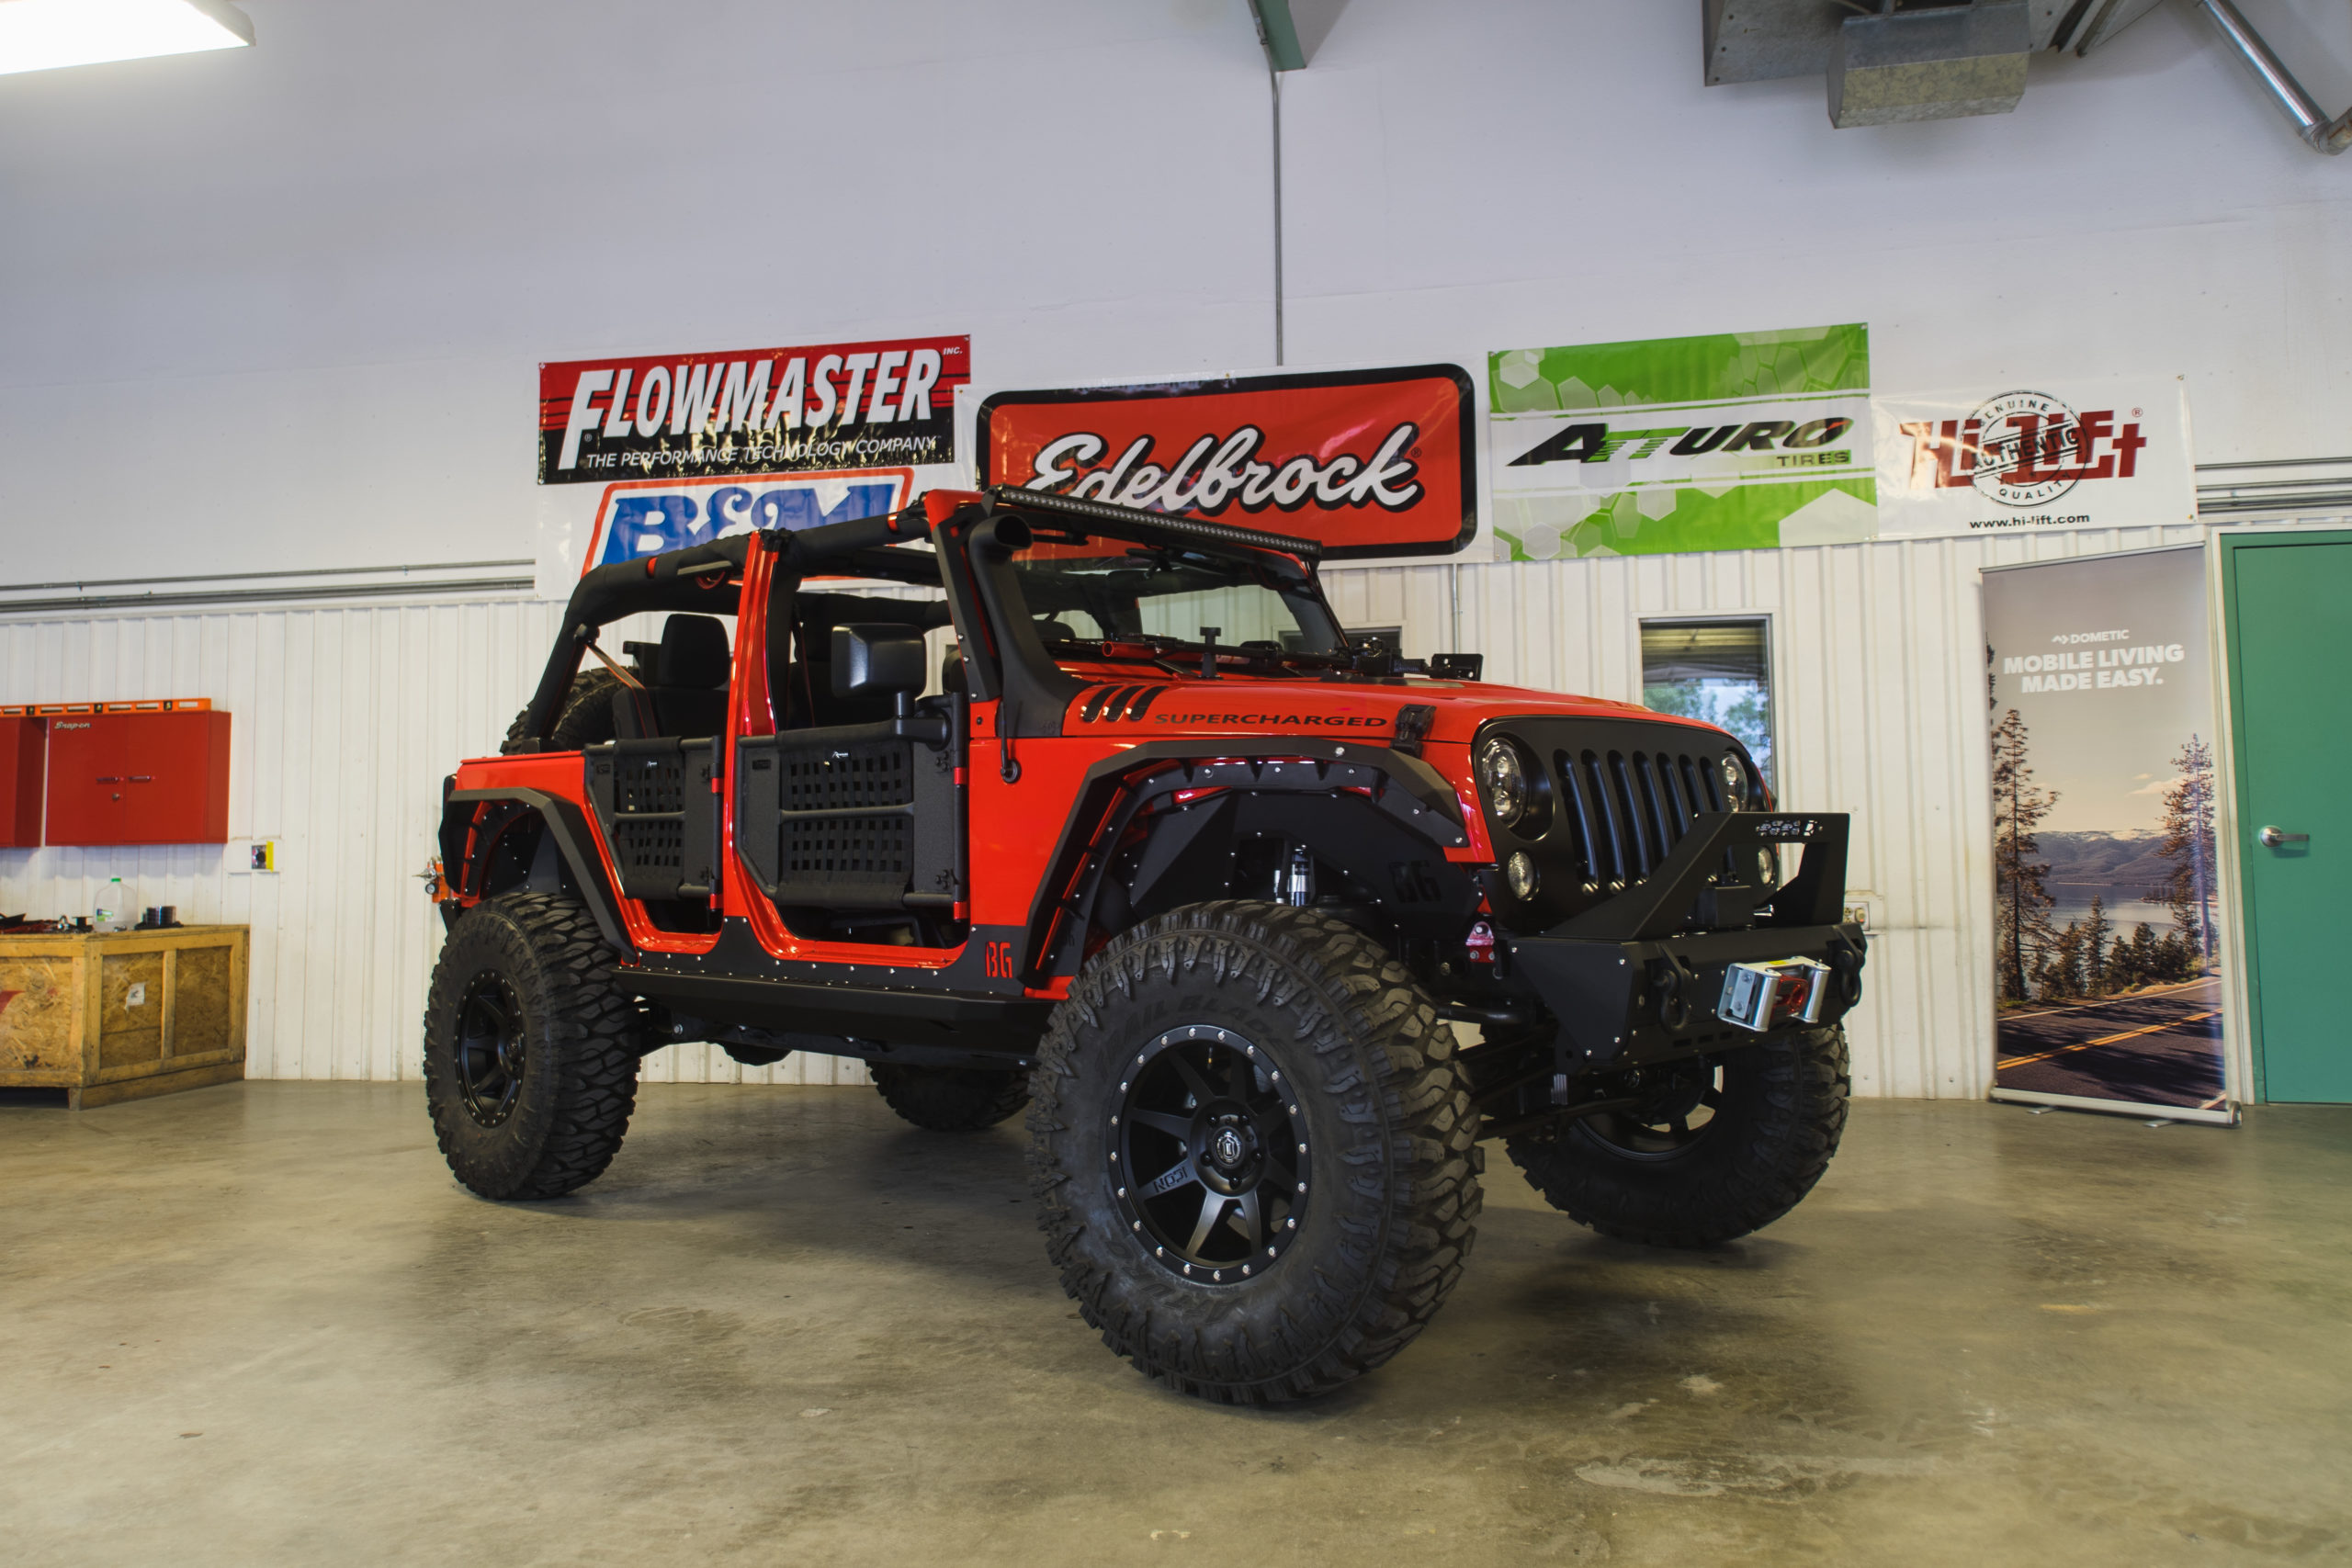 2015 4WD Jeep Wrangler Unlimited donated by SEMA and customized by students in the Santa Fe Early College Opportunities (ECO) A